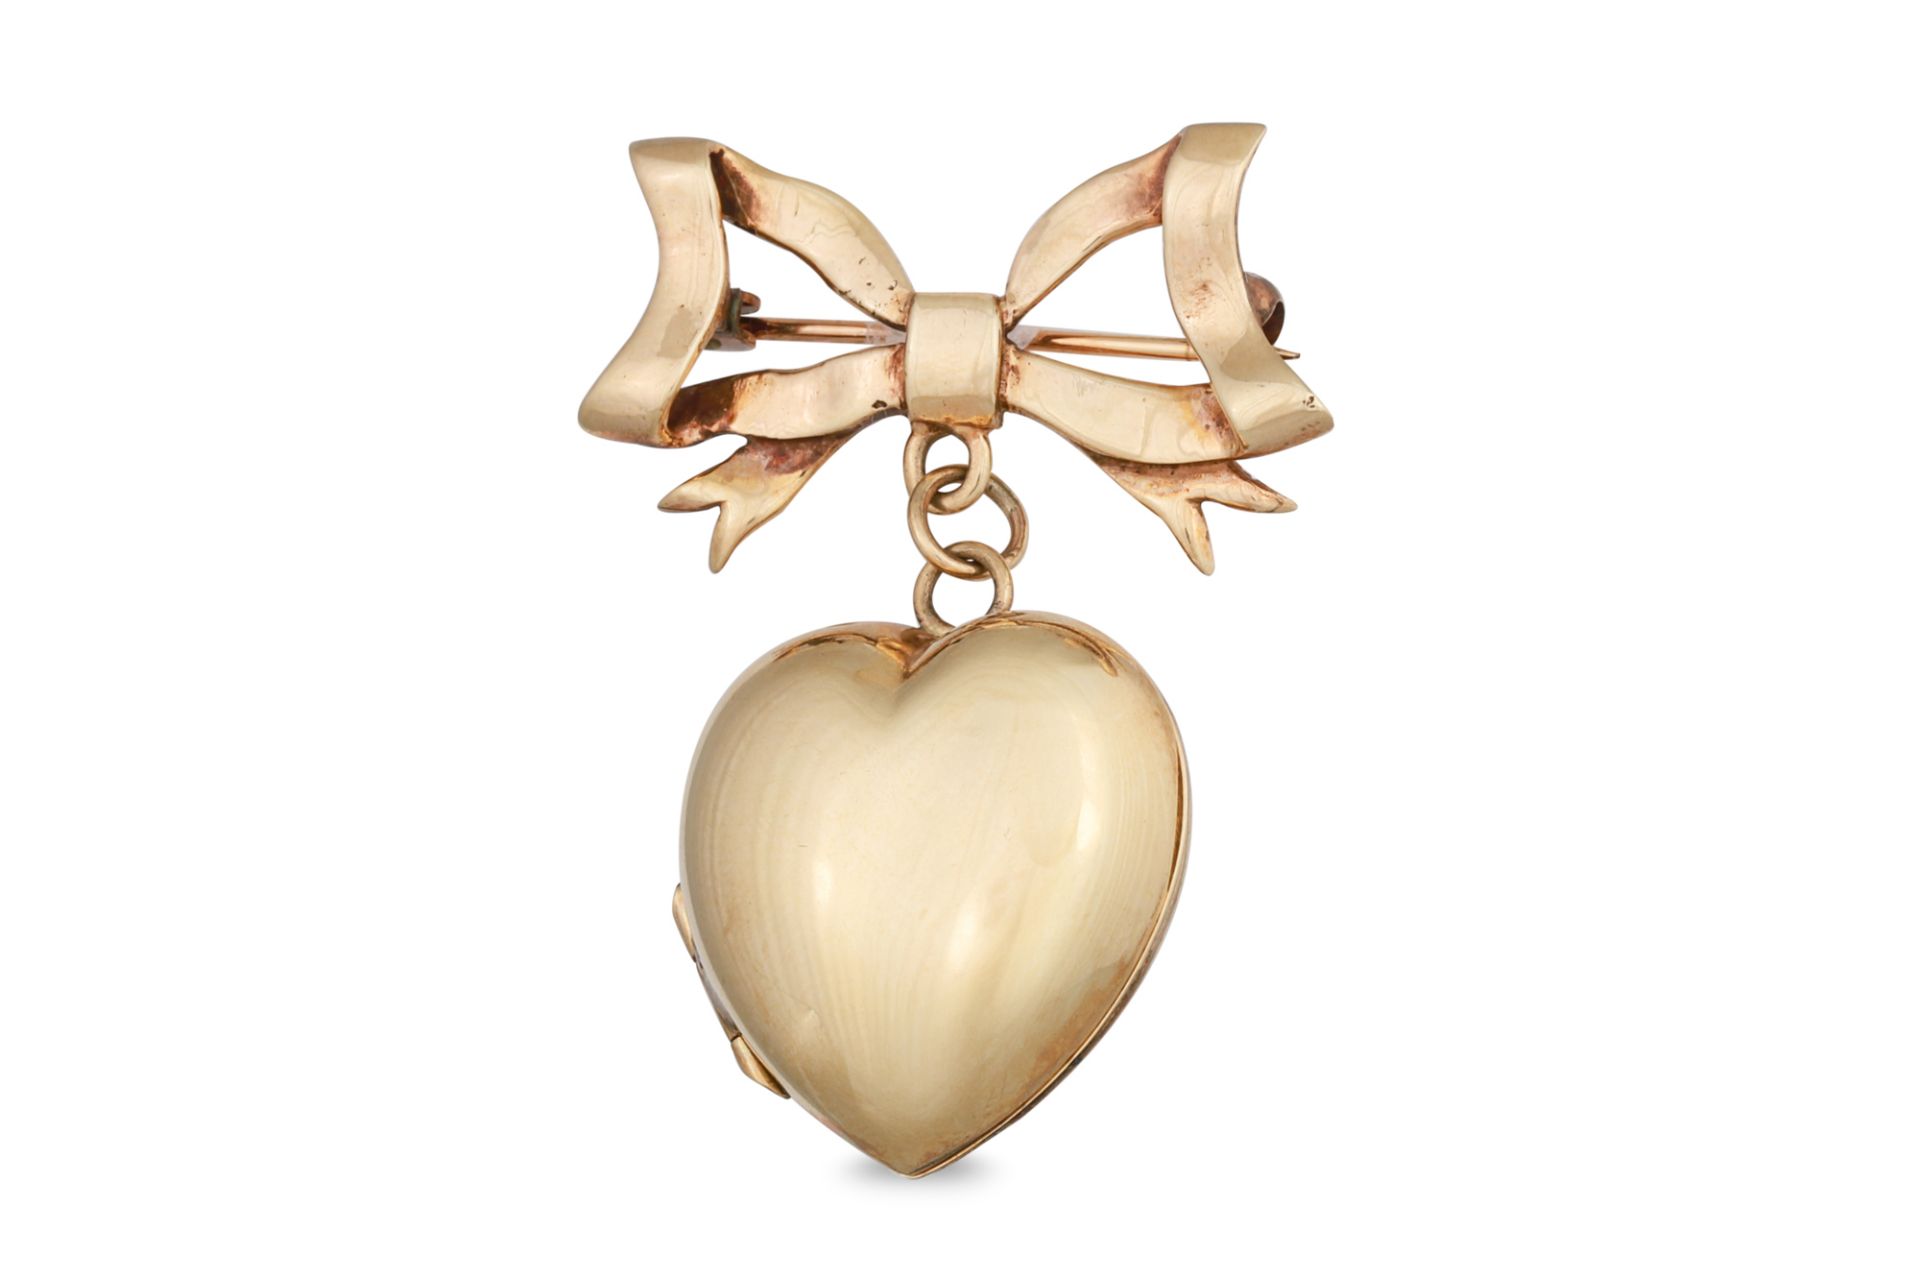 A HEART SHAPED LOCKET, in 9ct gold, suspended from a bow shaped pin, 7.3 g.